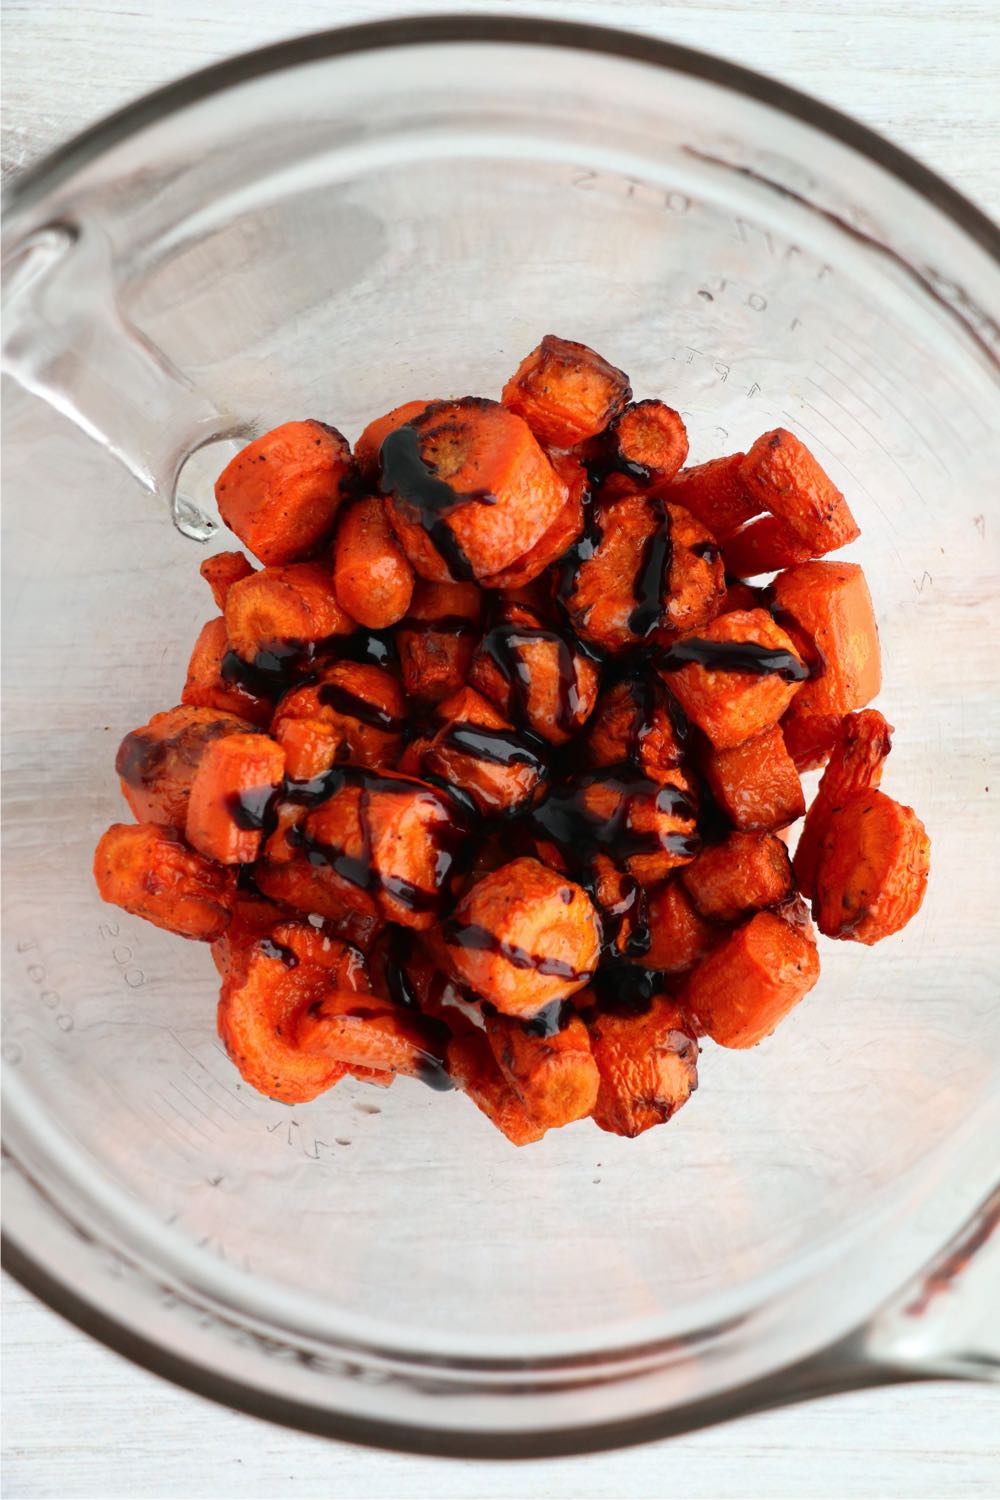 Tossing roasted carrots in a bowl with balsamic glaze